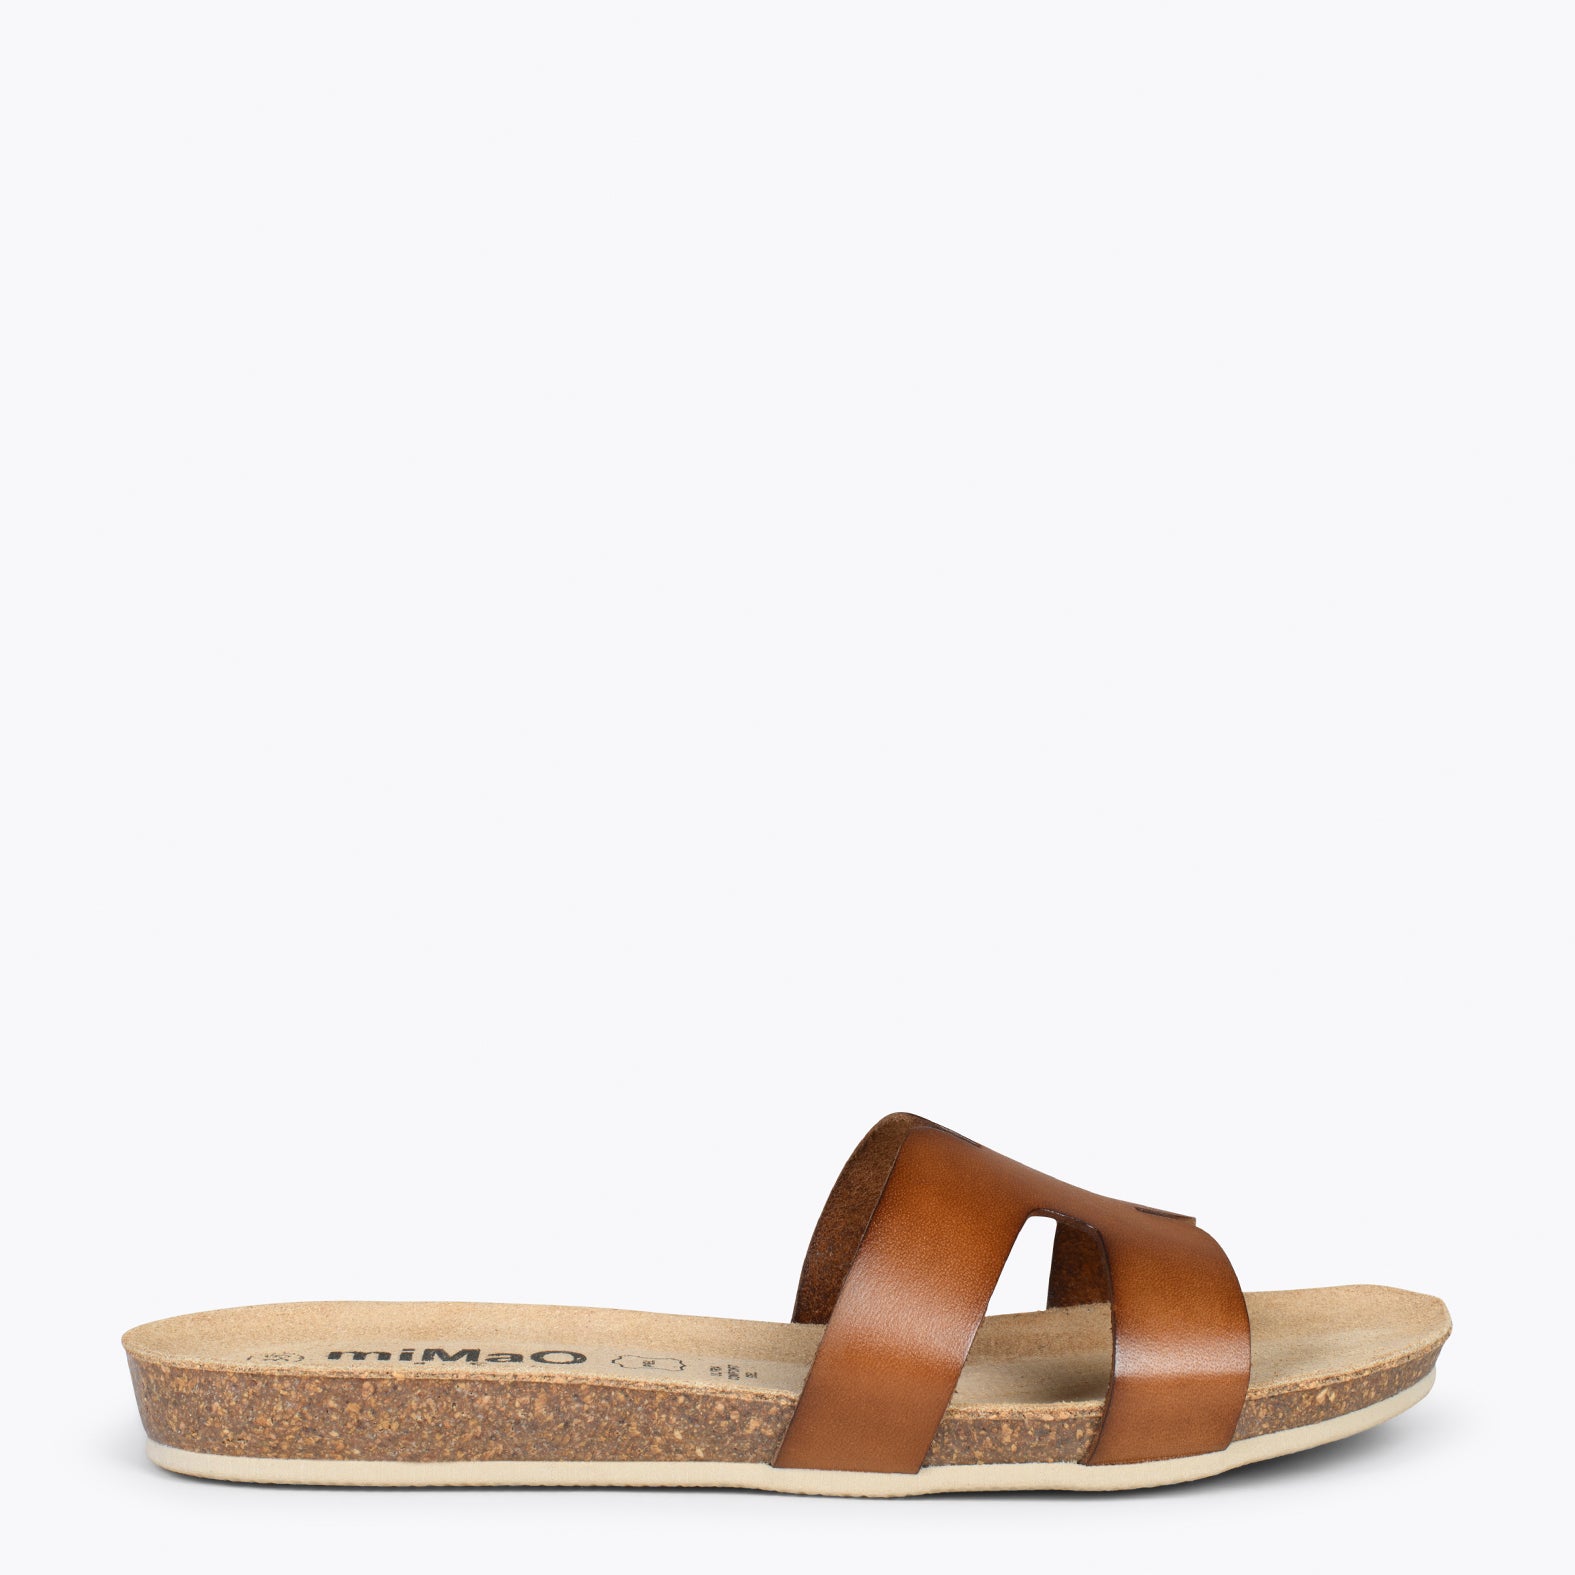 CLIVIA – BROWN nappa leather slides